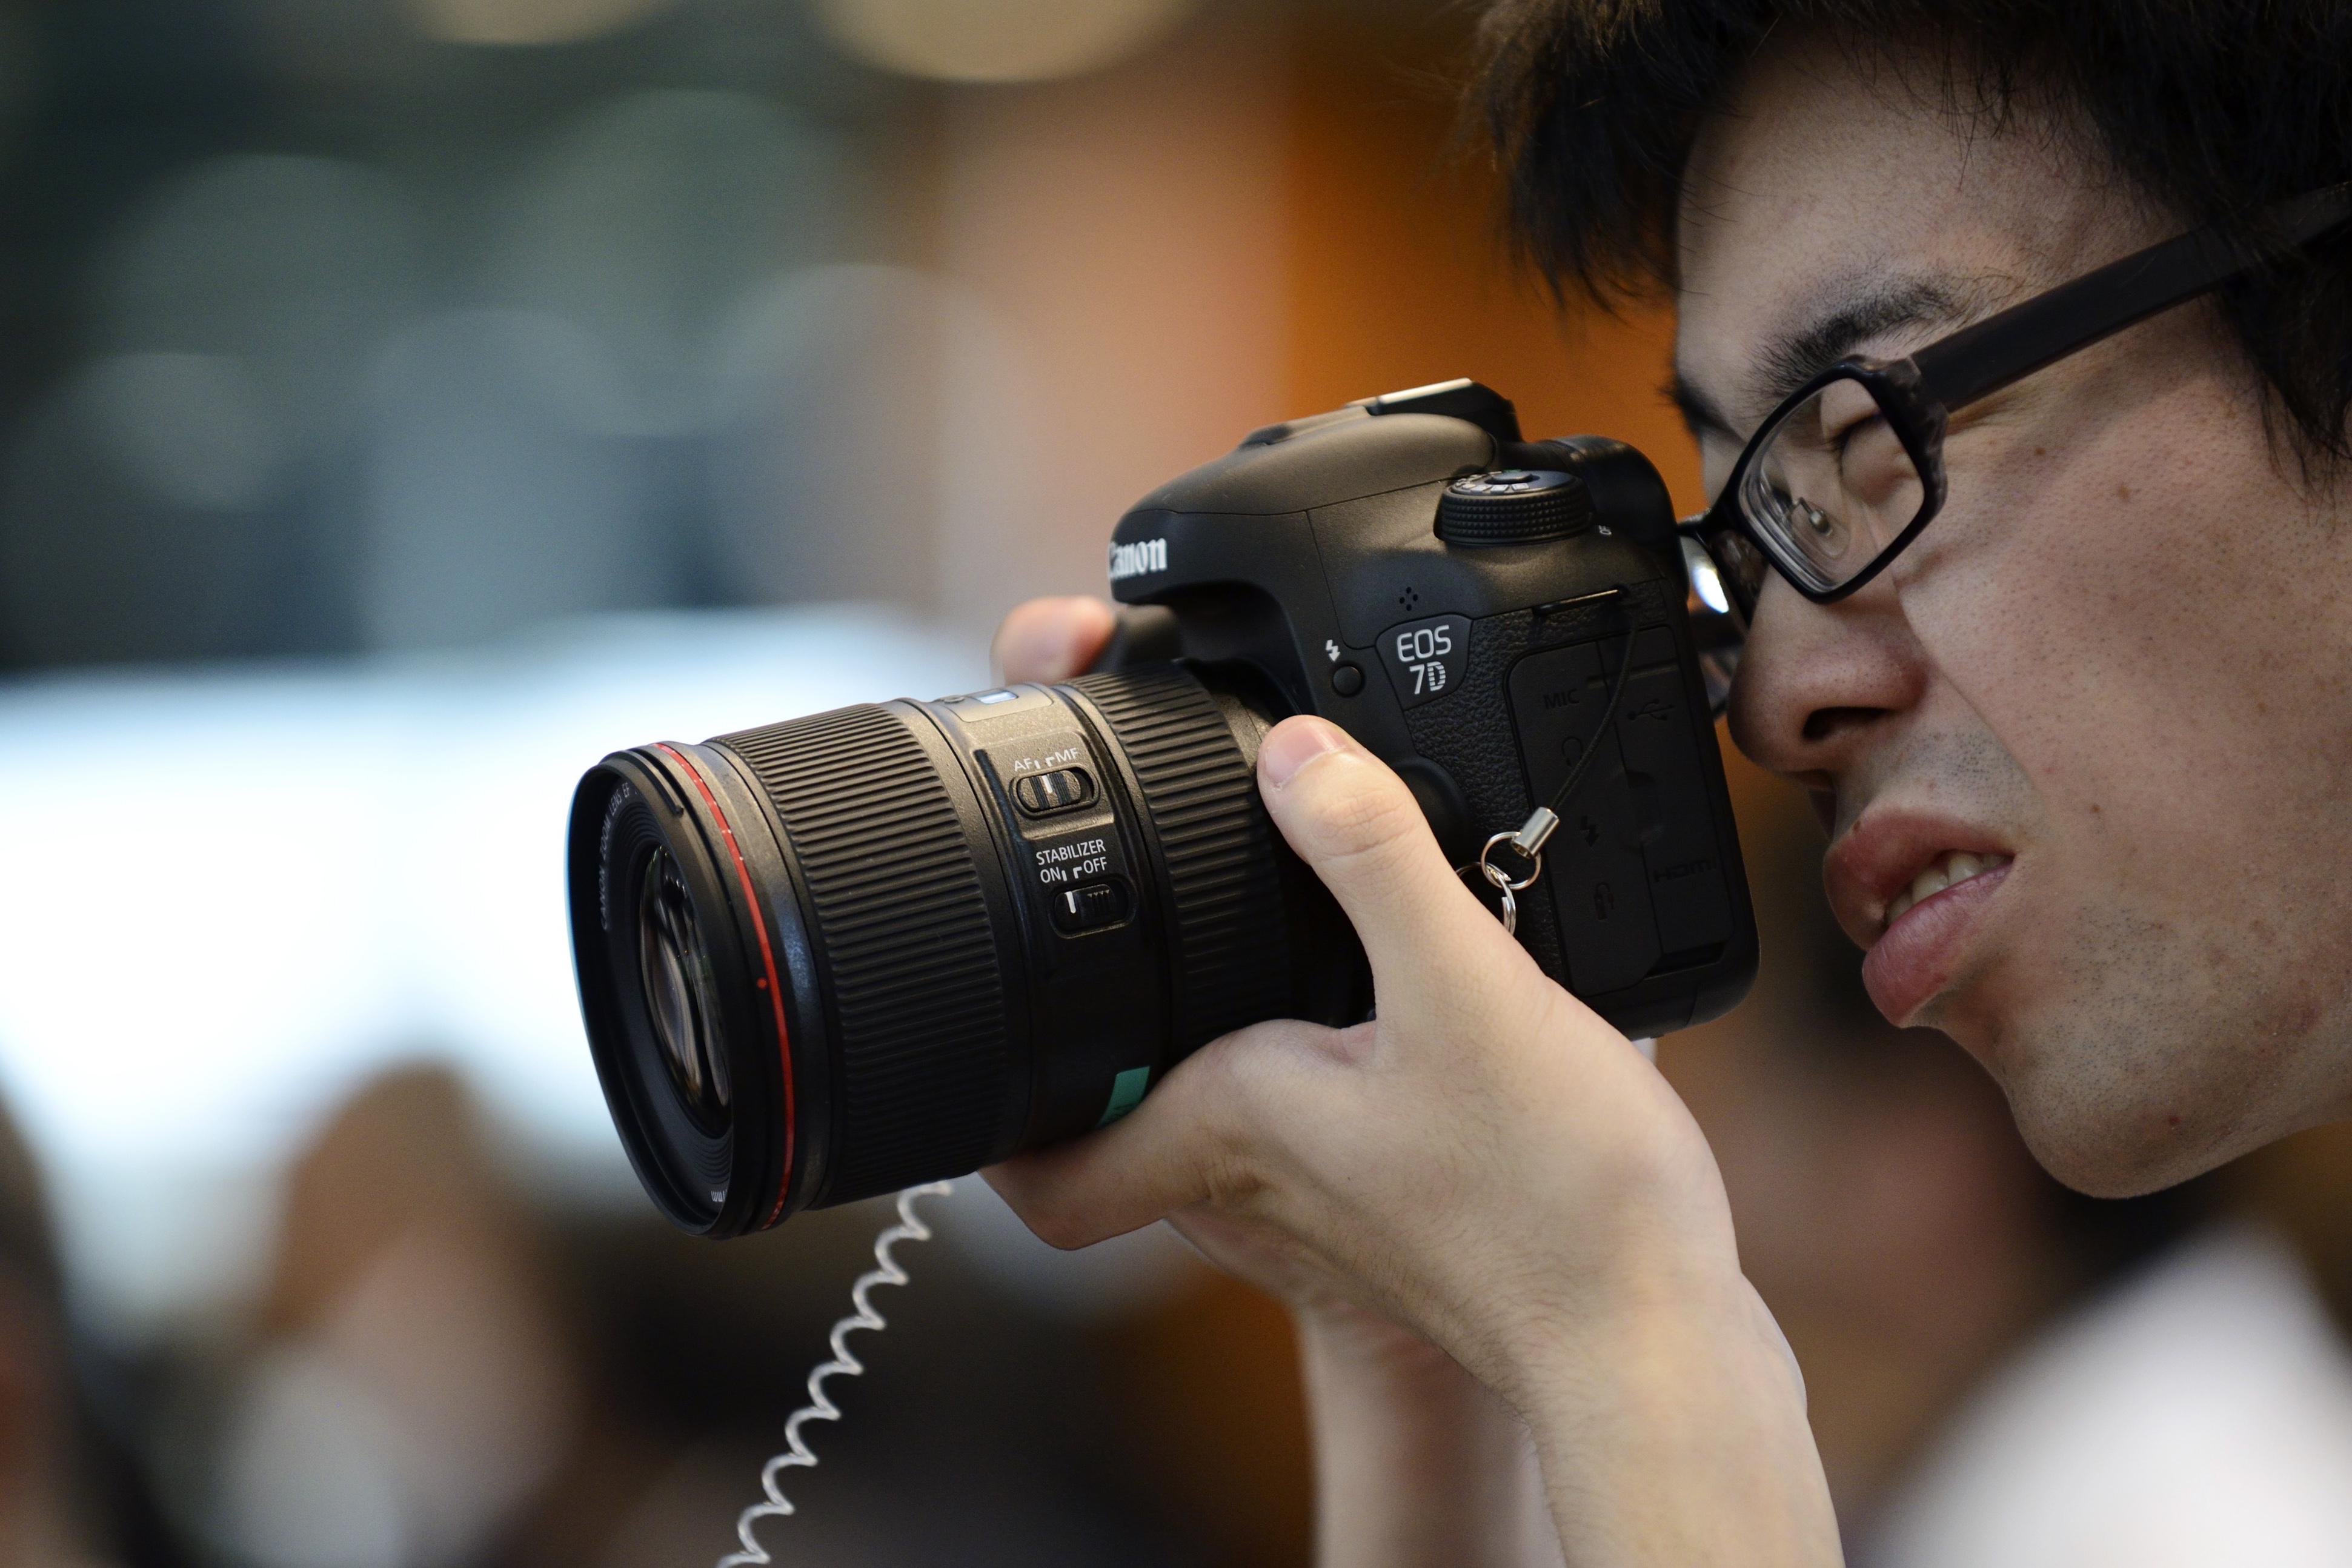 An attendee tries the Canon Inc. EOS 7D Mark II digital single lens reflex (DSLR) camera during its unveiling in Tokyo, Japan, on Tuesday, Sept. 16, 2014. (Bloomberg&mdash;Bloomberg via Getty Images)